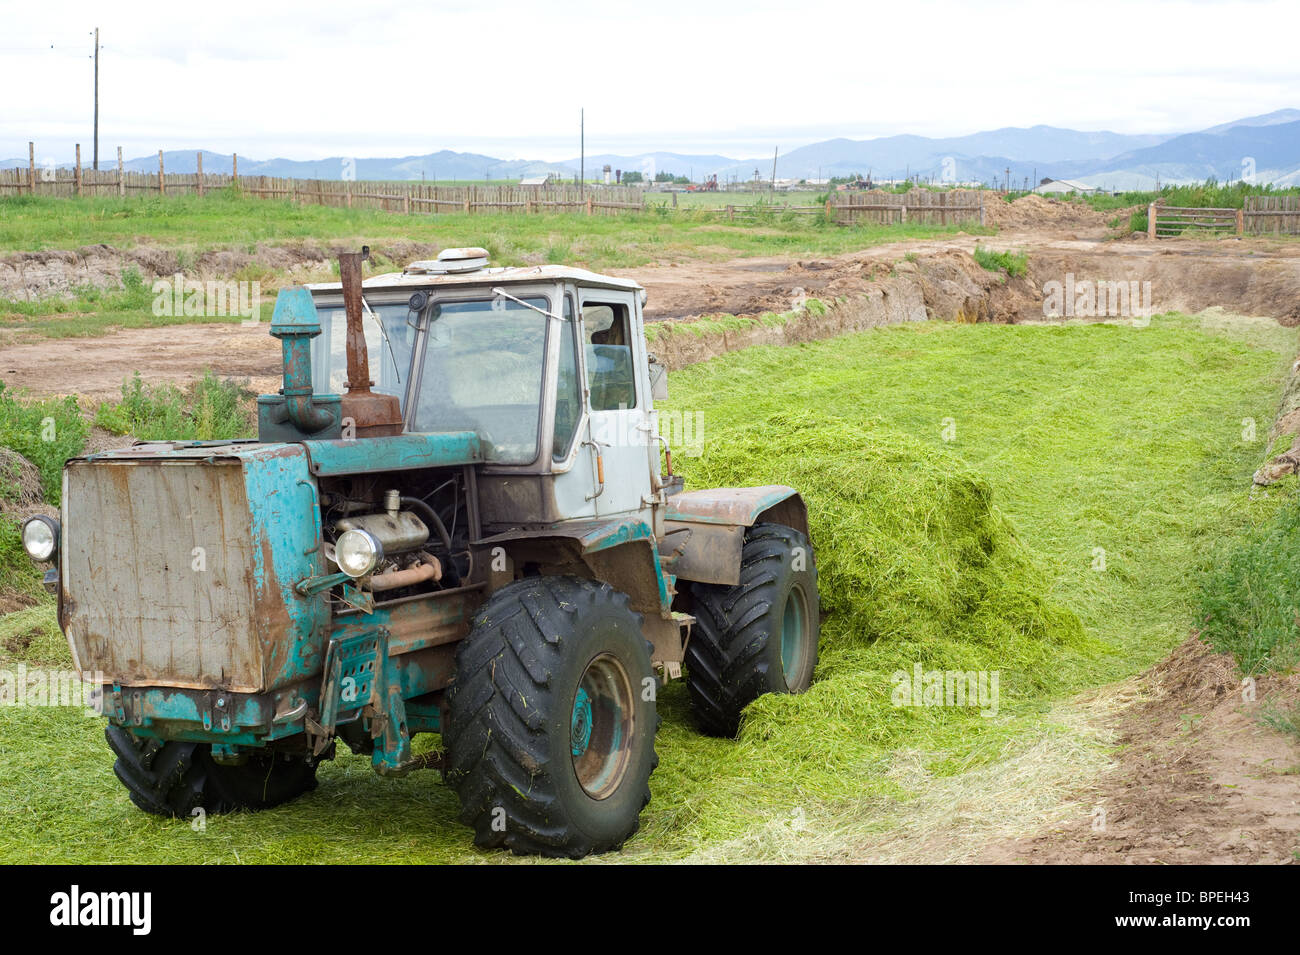 tractor making bunker silo in outdated way Stock Photo